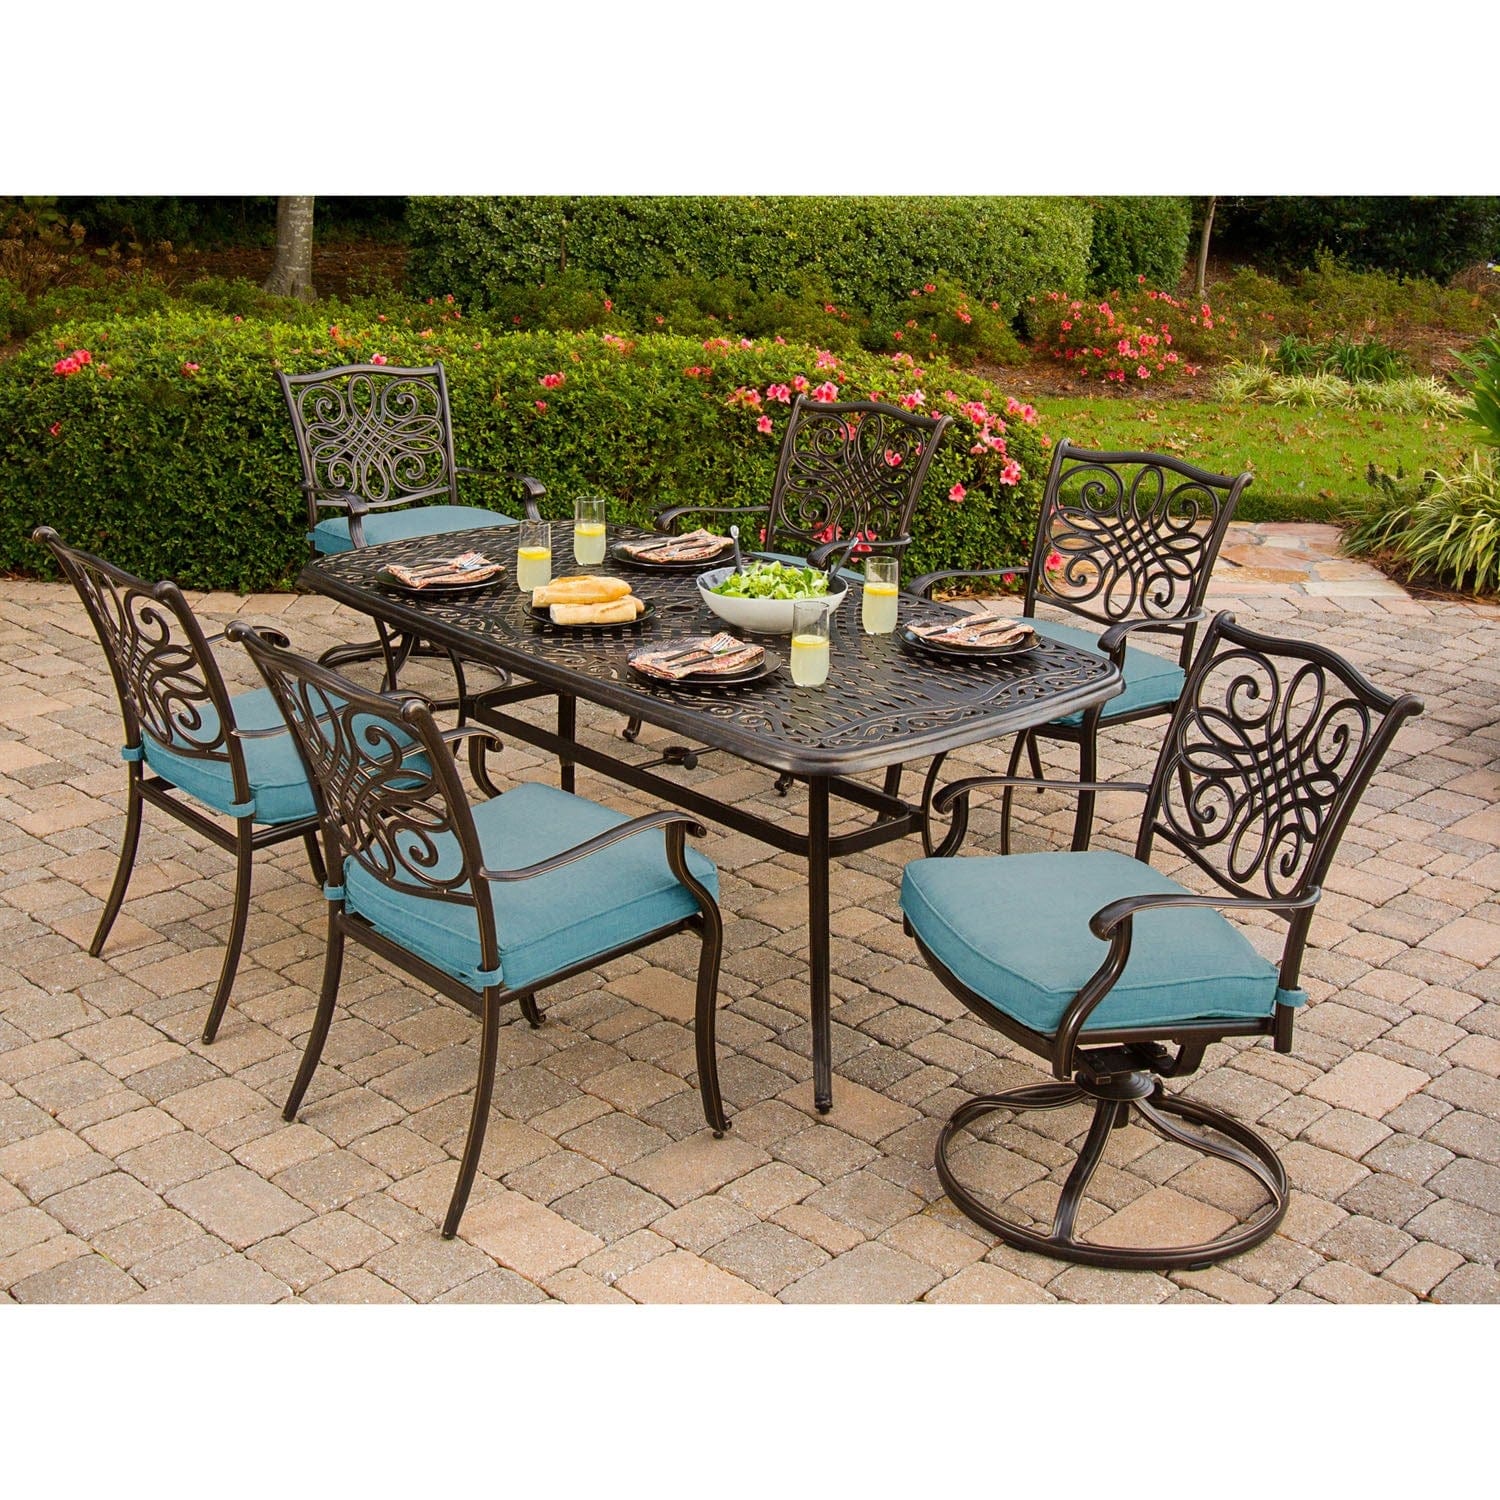 Hanover Outdoor Dining Set Hanover - Traditions 7-Piece Dining Set | Aluminium Frame | Blue | TRADDN7PCSW-BLU